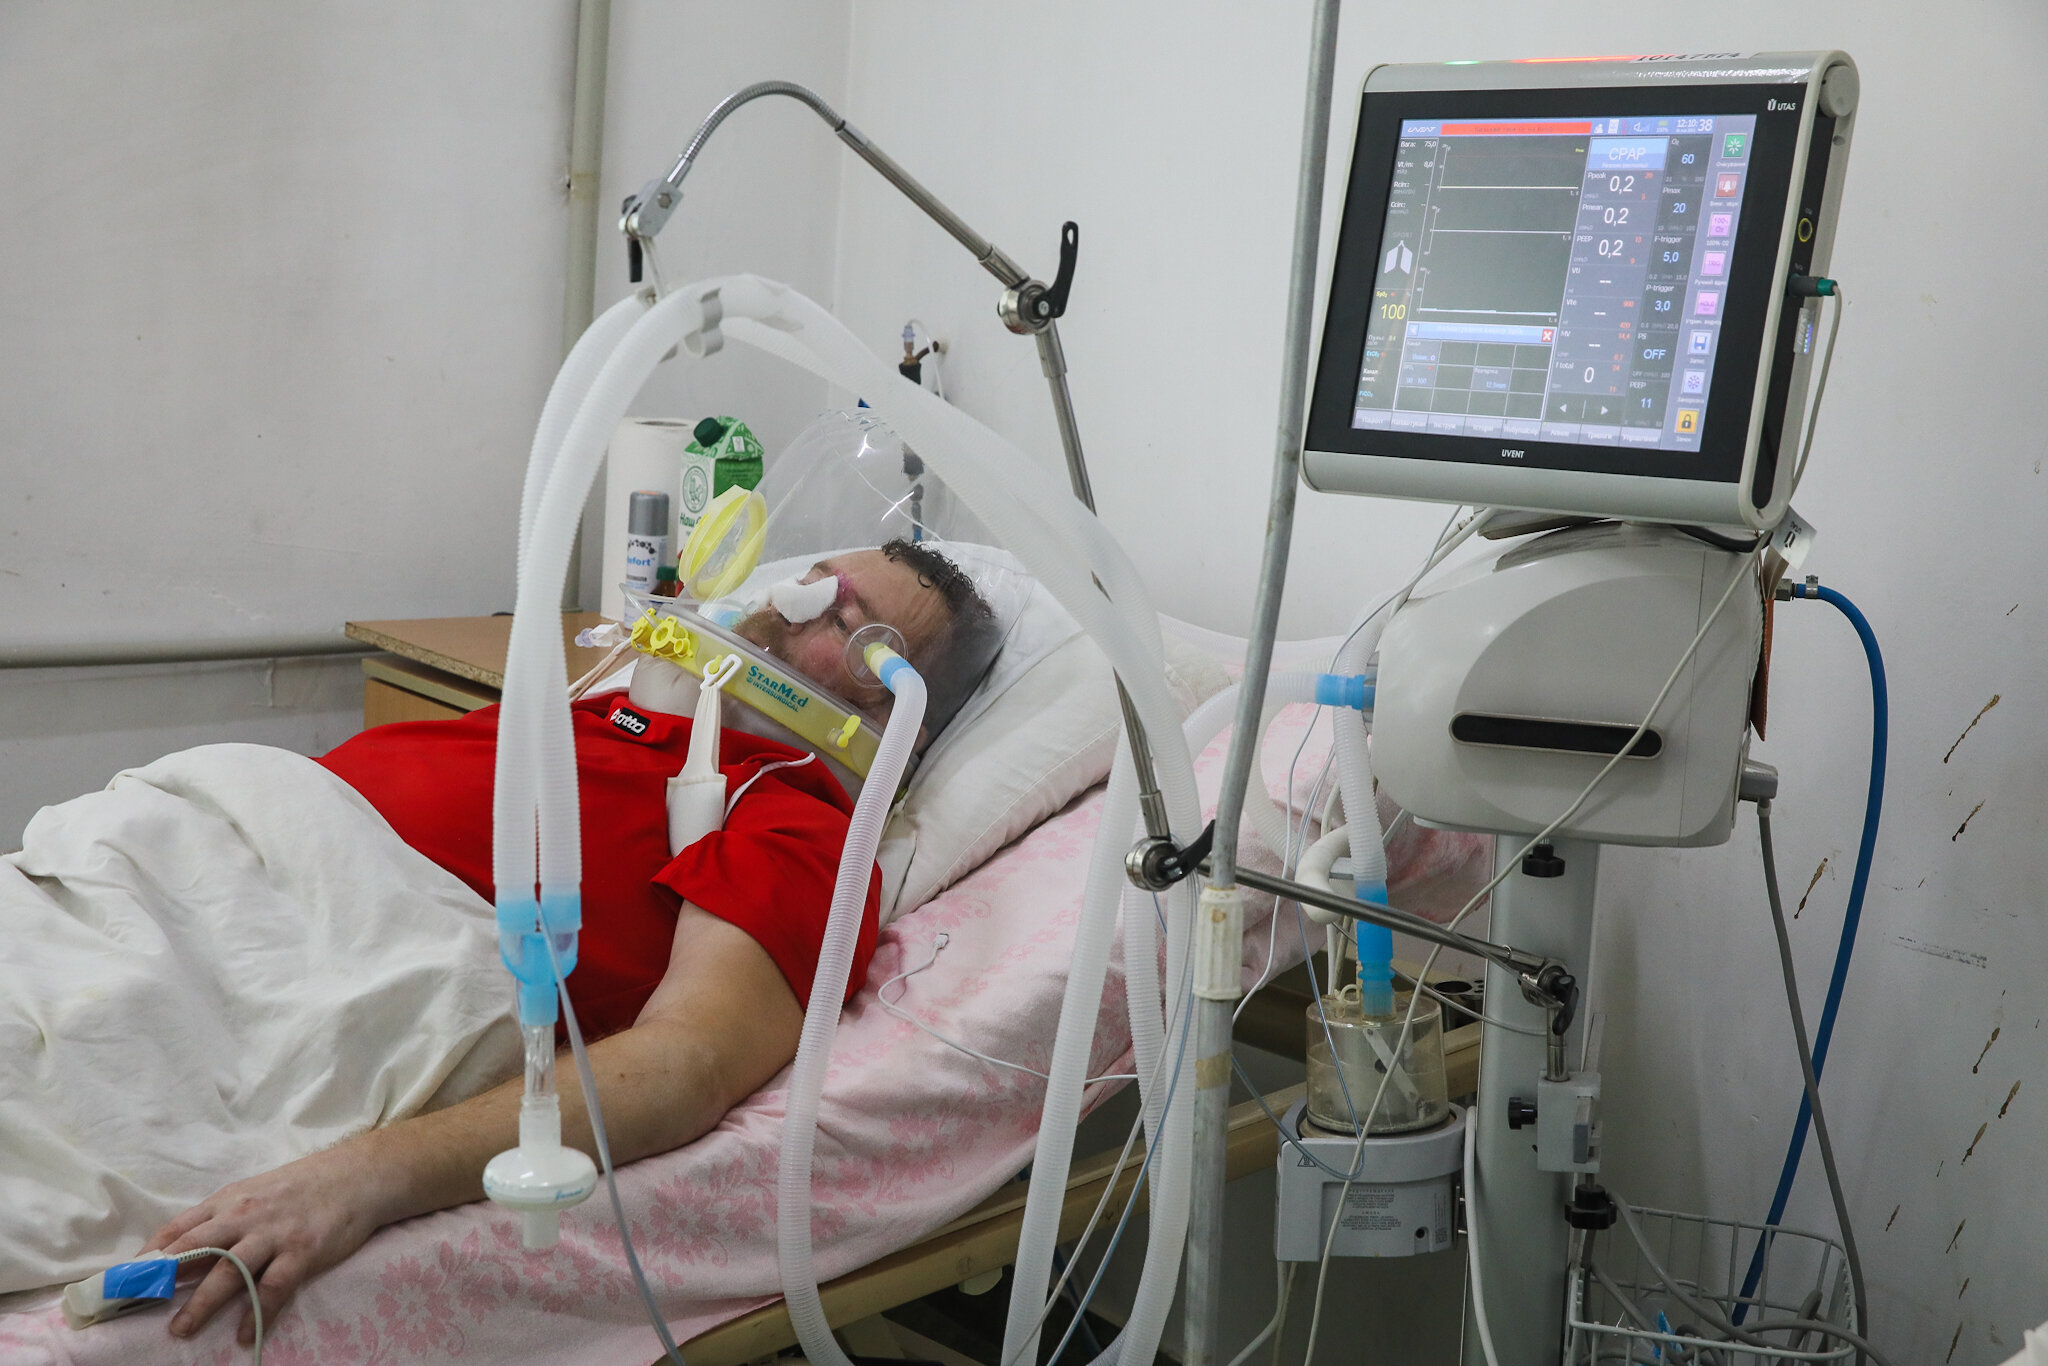 COVID-19 patient Vasyl wears a helmet supplying him with oxygen-enriched air at Kolomyia District Hospital in Ivano-Frankivsk Oblast on March 16, 2021.